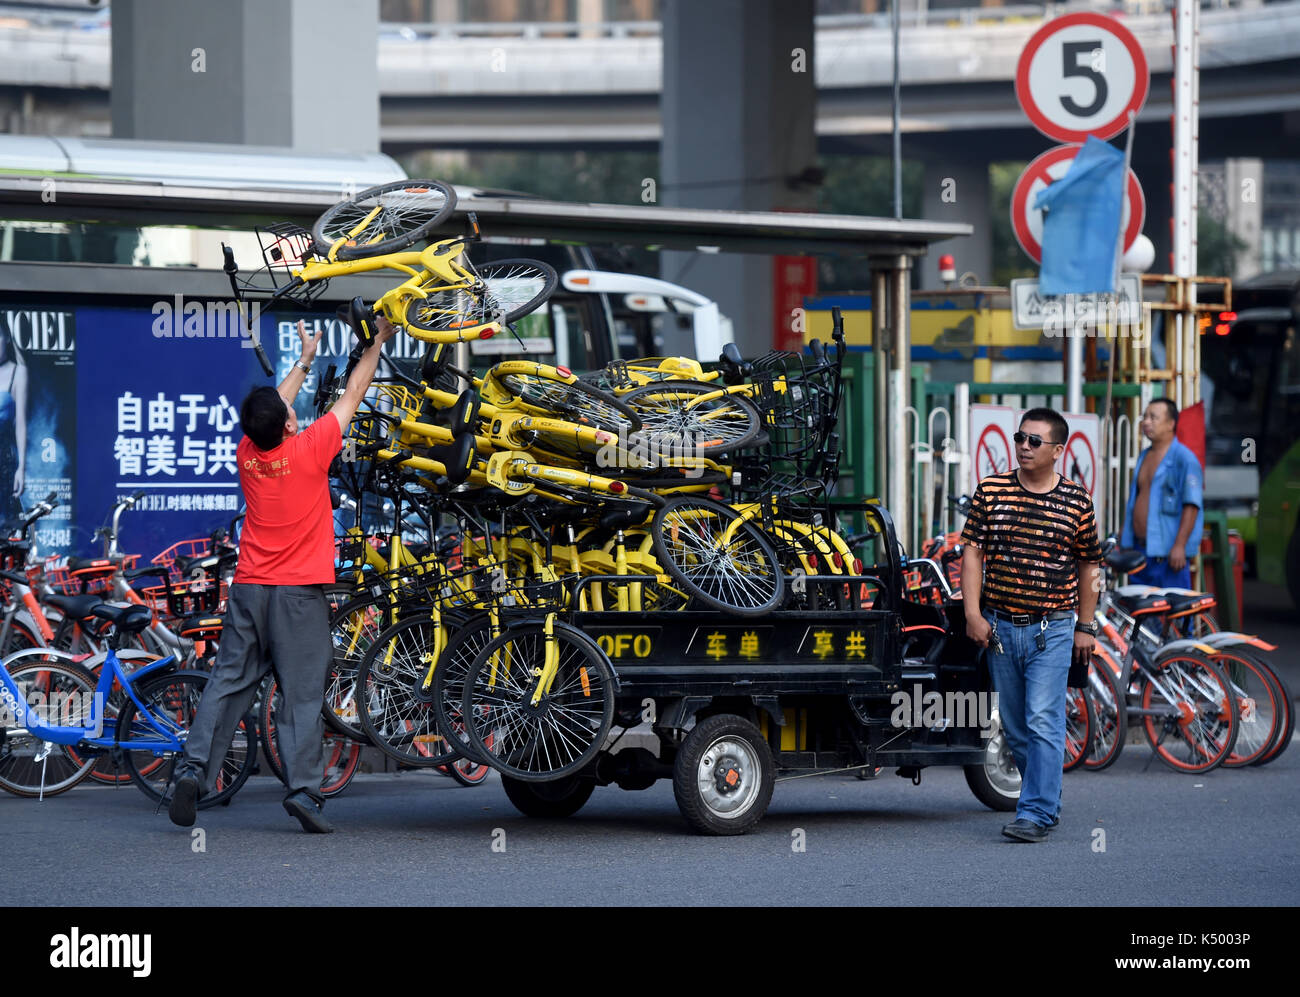 (170908) -- BEIJING, Sept. 8, 2017 (Xinhua) -- A working staff arranges the shared bikes parked under the Guomao Bridge in Beijing, capital of China, Sept. 7, 2017. Beijing will ban the new addition of shared bikes in the city, local authorities announced Thursday. There are 2.35 million shared bikes from 15 companies on the streets of the national capital, according to a spokesperson with the Beijing Municipal Commission of Transport. Shared bikes, the number of which surged in Beijing in the past year, have led to haphazard parking and obstructions in crowded areas such as subway entrances Stock Photo